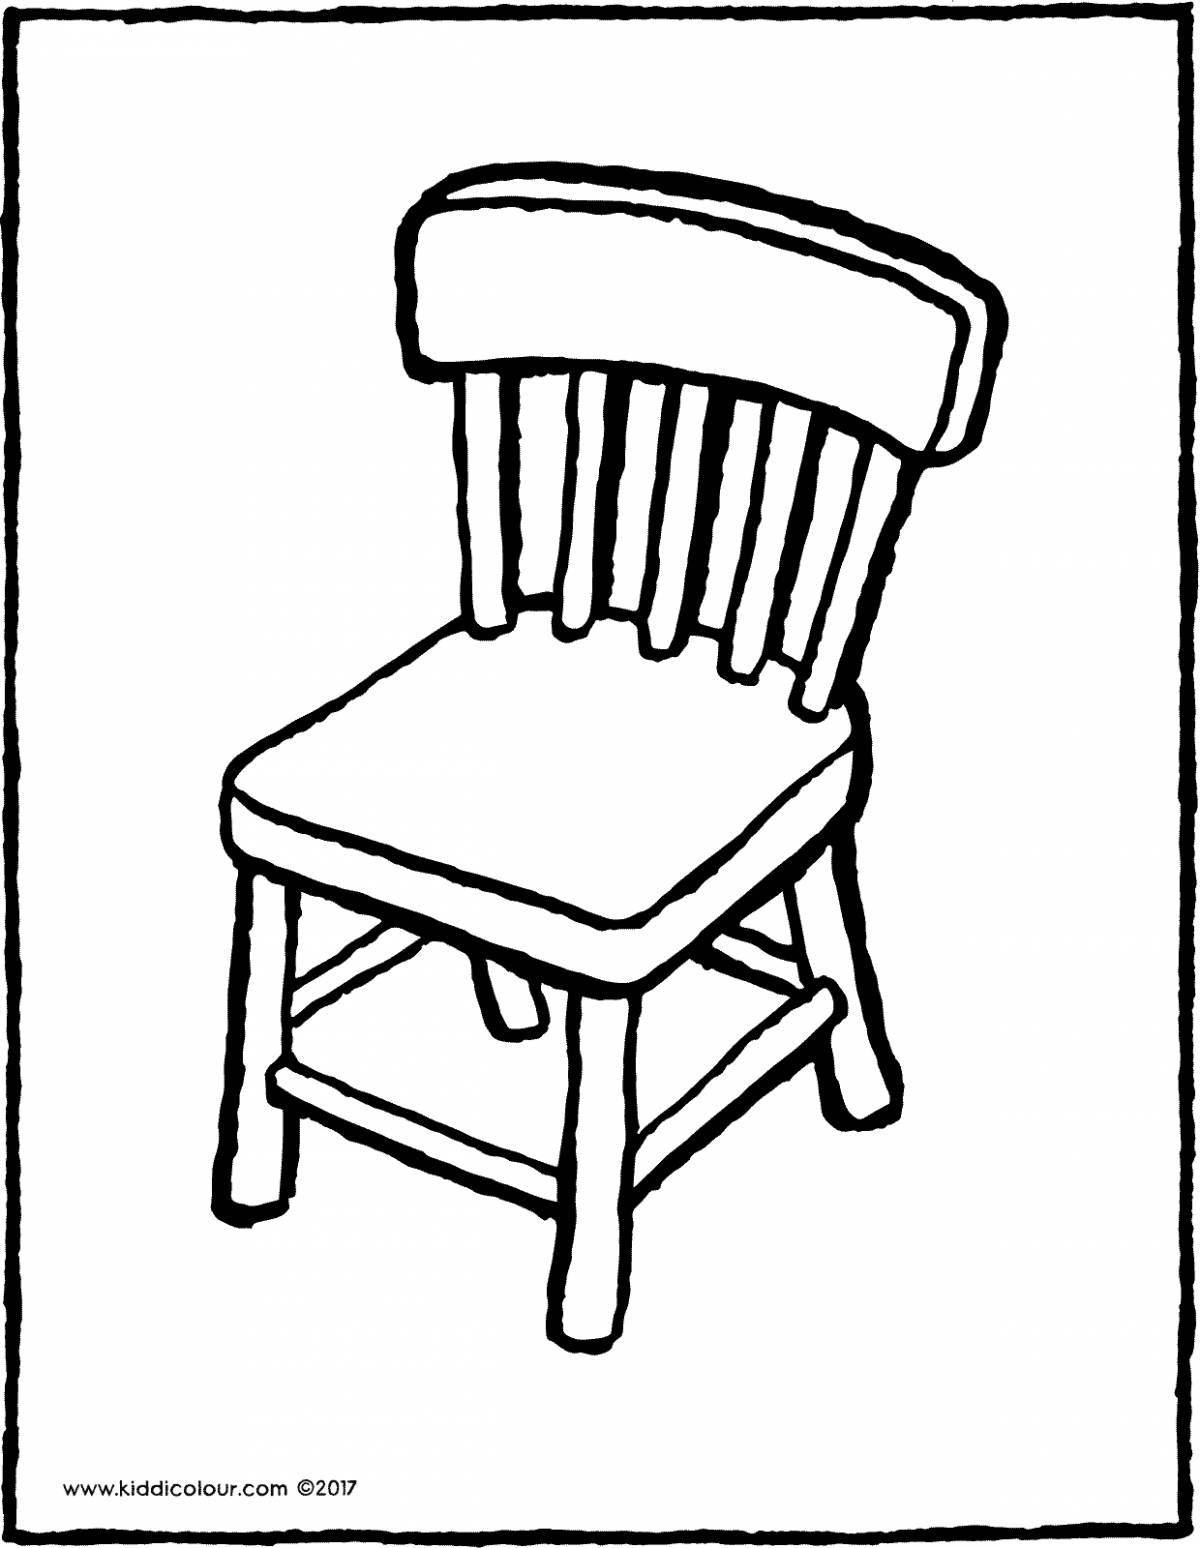 Coloring book magic chair for kids